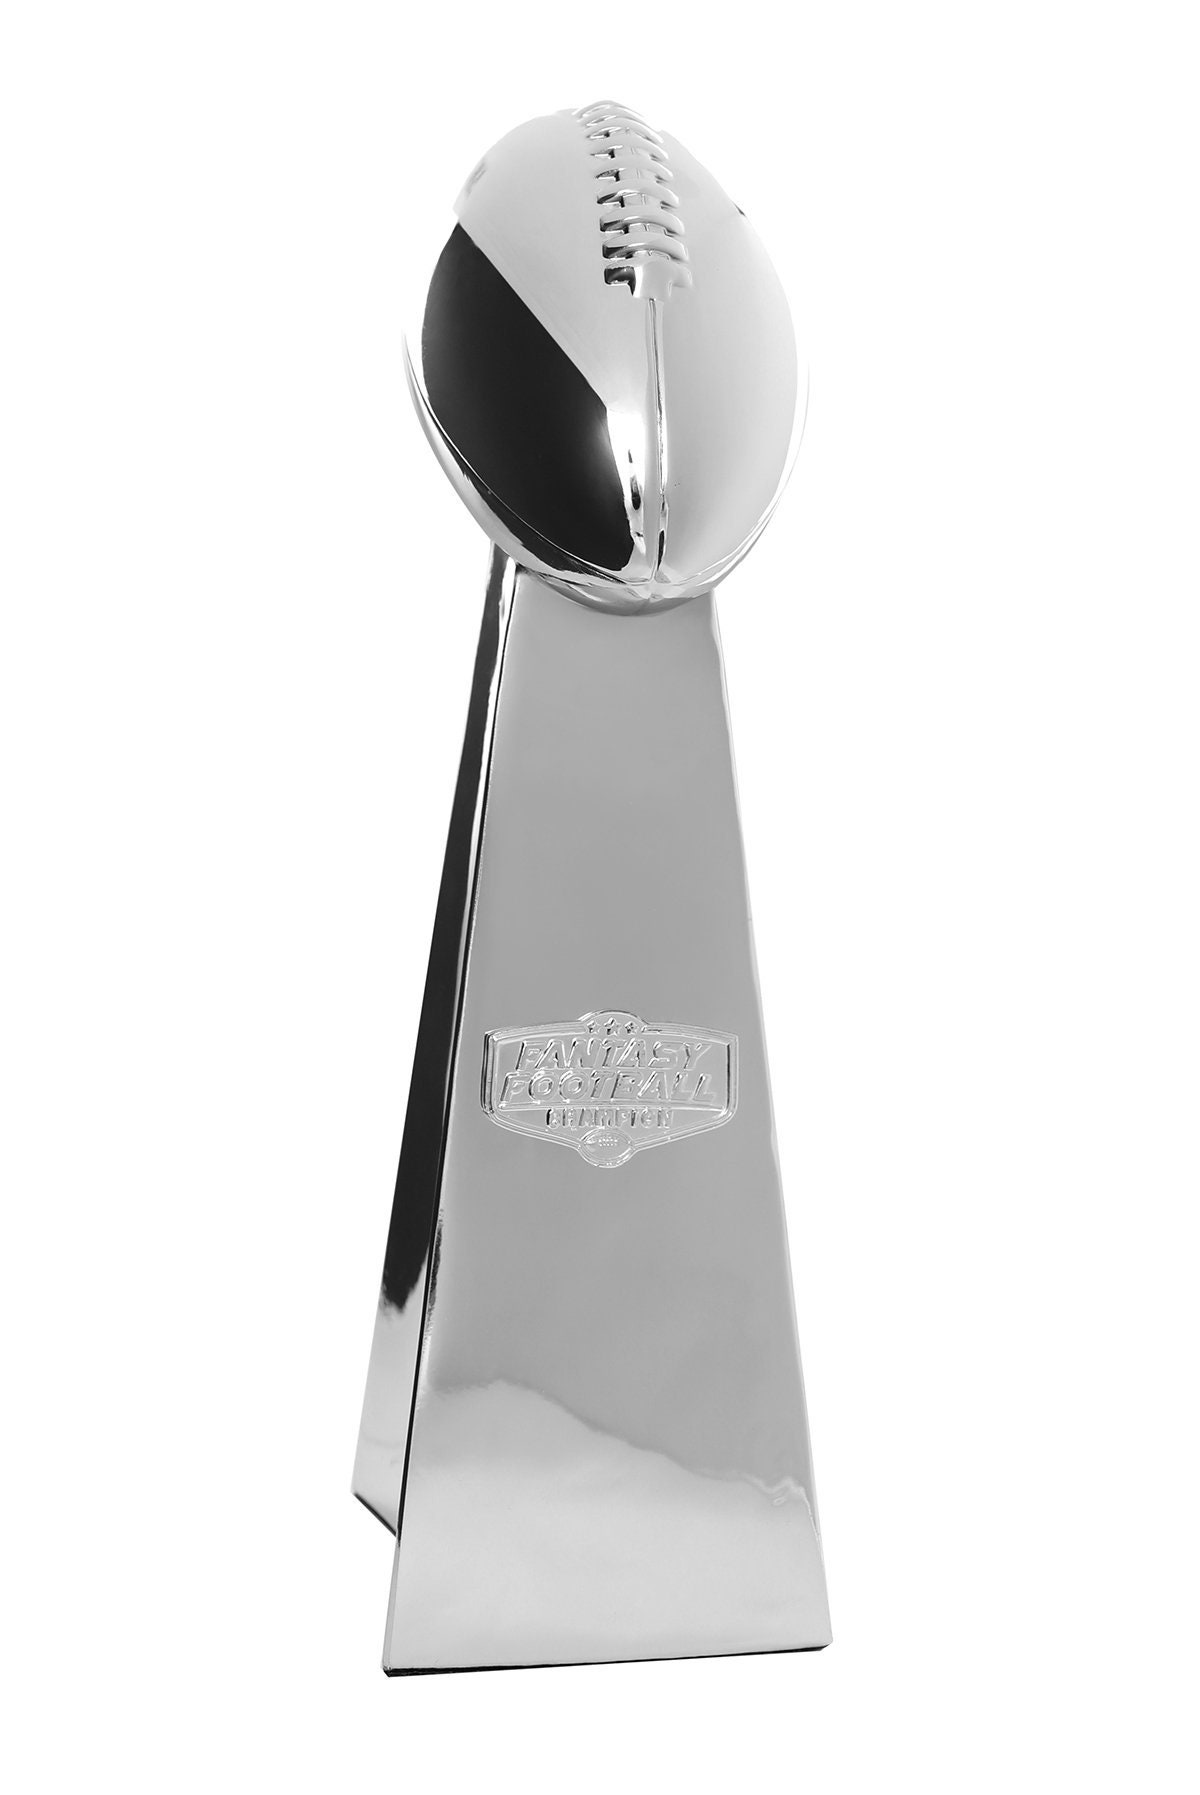 FANTASY FOOTBALL 14" 18 YEAR CHAMPION TROPHY SHIPS IN 1 DAY FREE ENGRAVING 